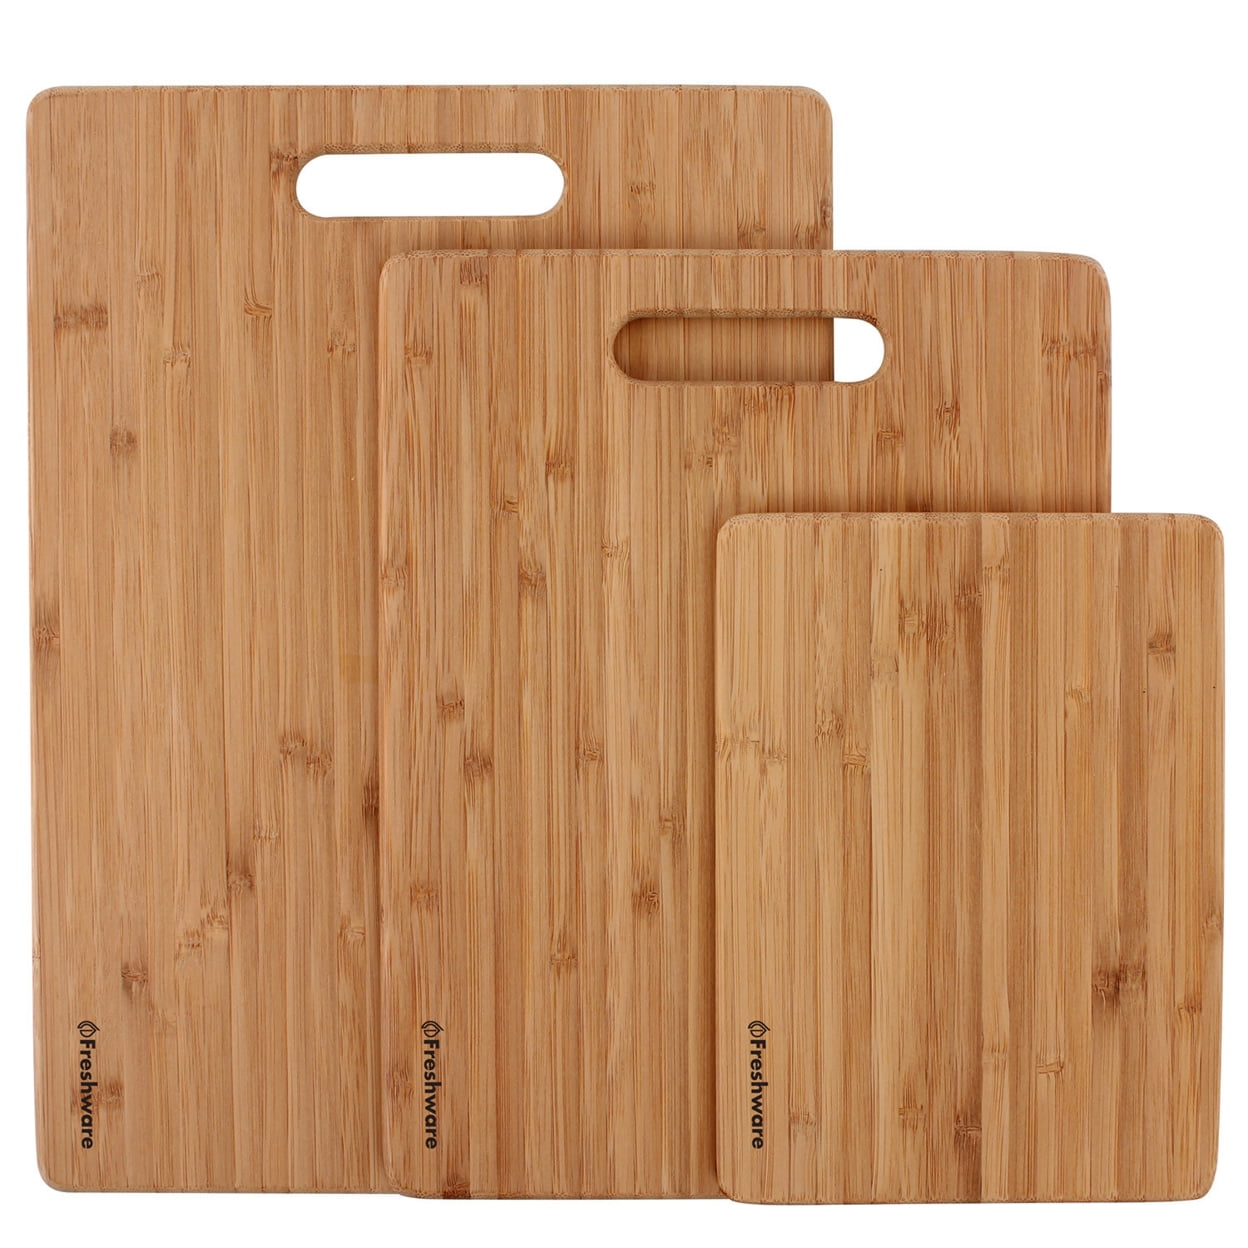 Wooden Cutting Boards for Kitchen - Bamboo Chopping Board Set of 3, 1 -  Kroger